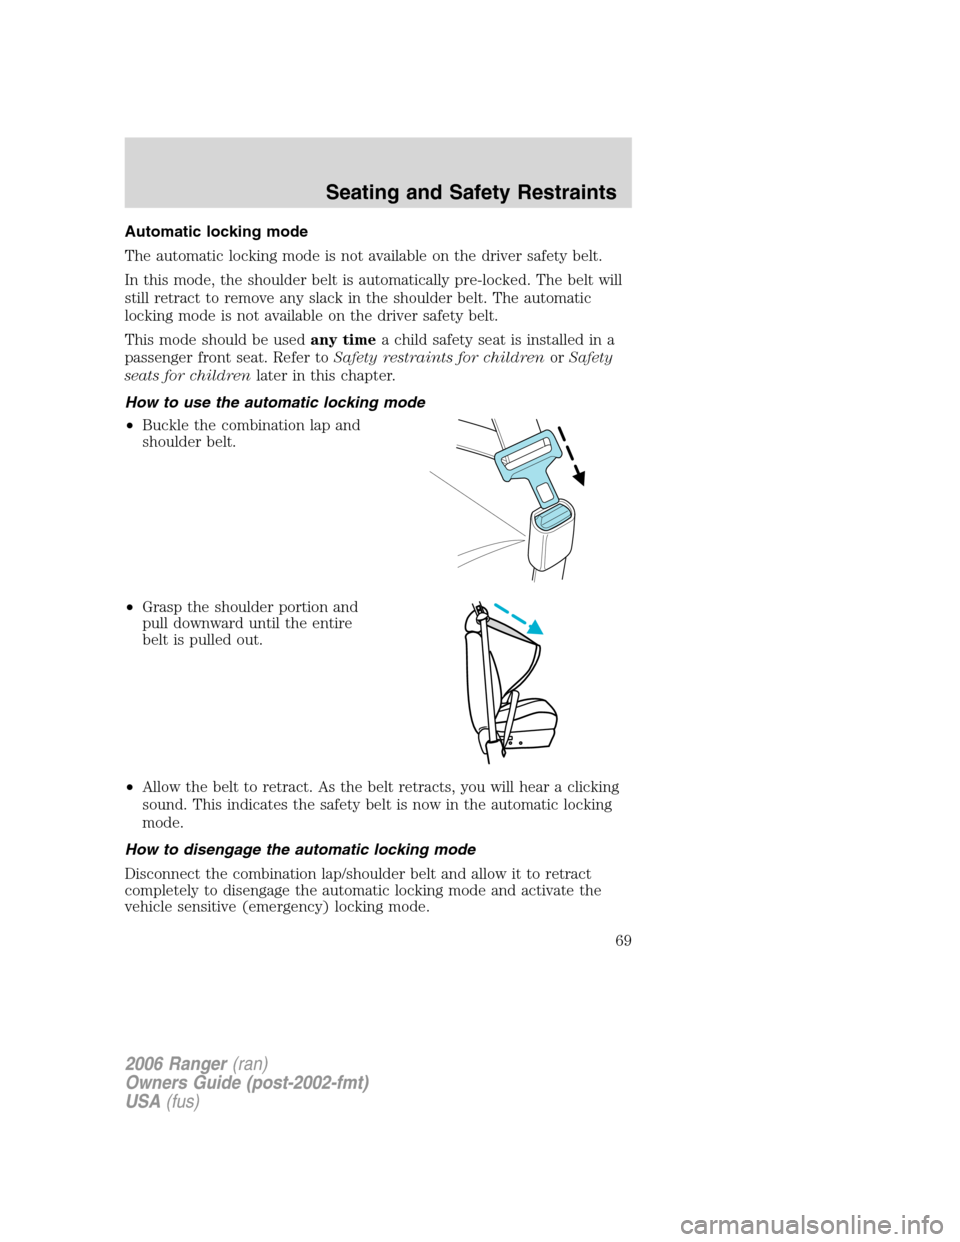 FORD RANGER 2006 2.G Owners Manual Automatic locking mode
The automatic locking mode is not available on the driver safety belt.
In this mode, the shoulder belt is automatically pre-locked. The belt will
still retract to remove any sla